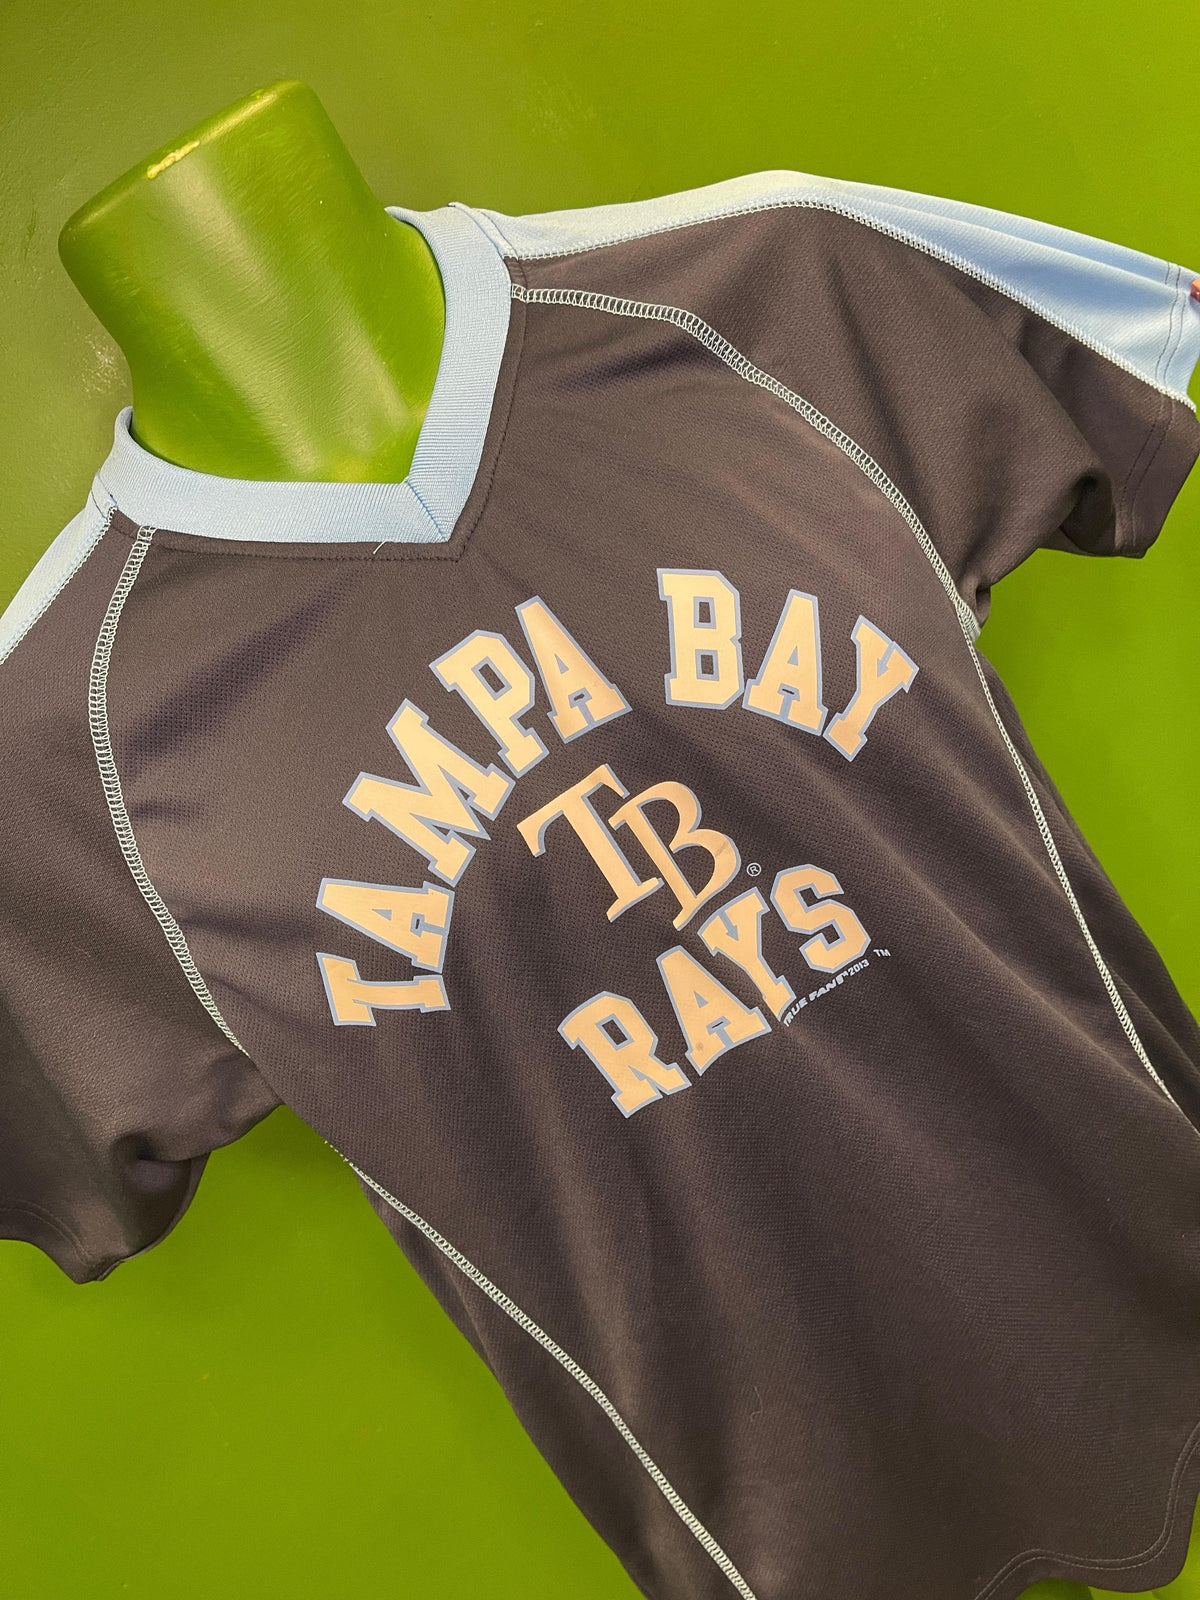 MLB Tampa Bay Rays Jersey-Style Top Youth Medium 10-12